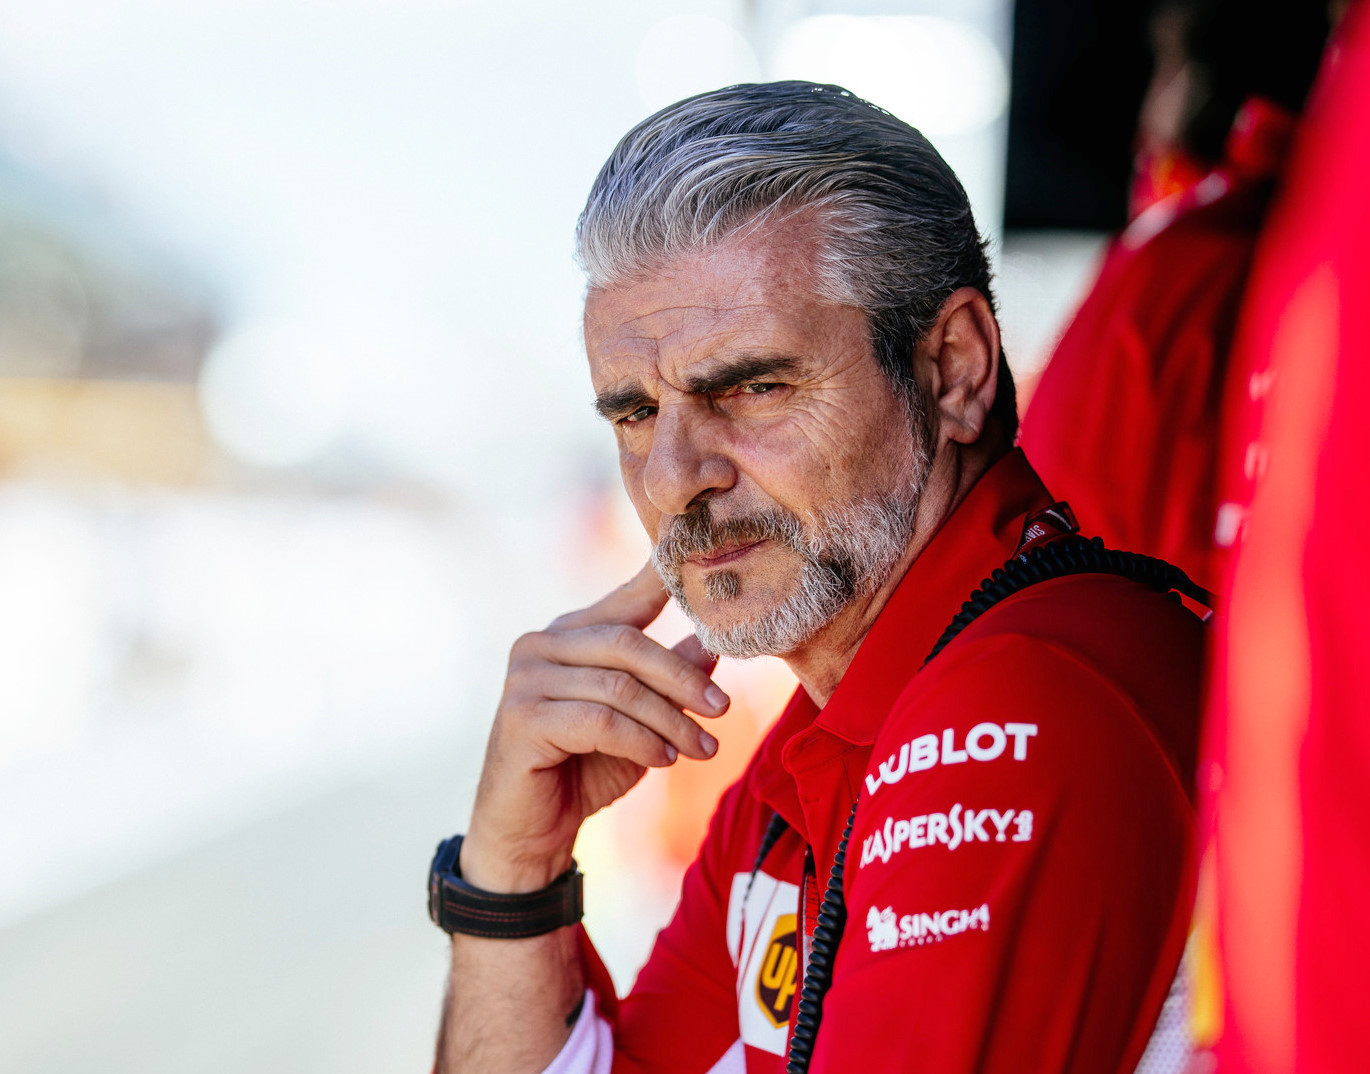 If arrivabene cannot steal Aldo Costa back from Mercedes Vettel will never win a title for Ferrari